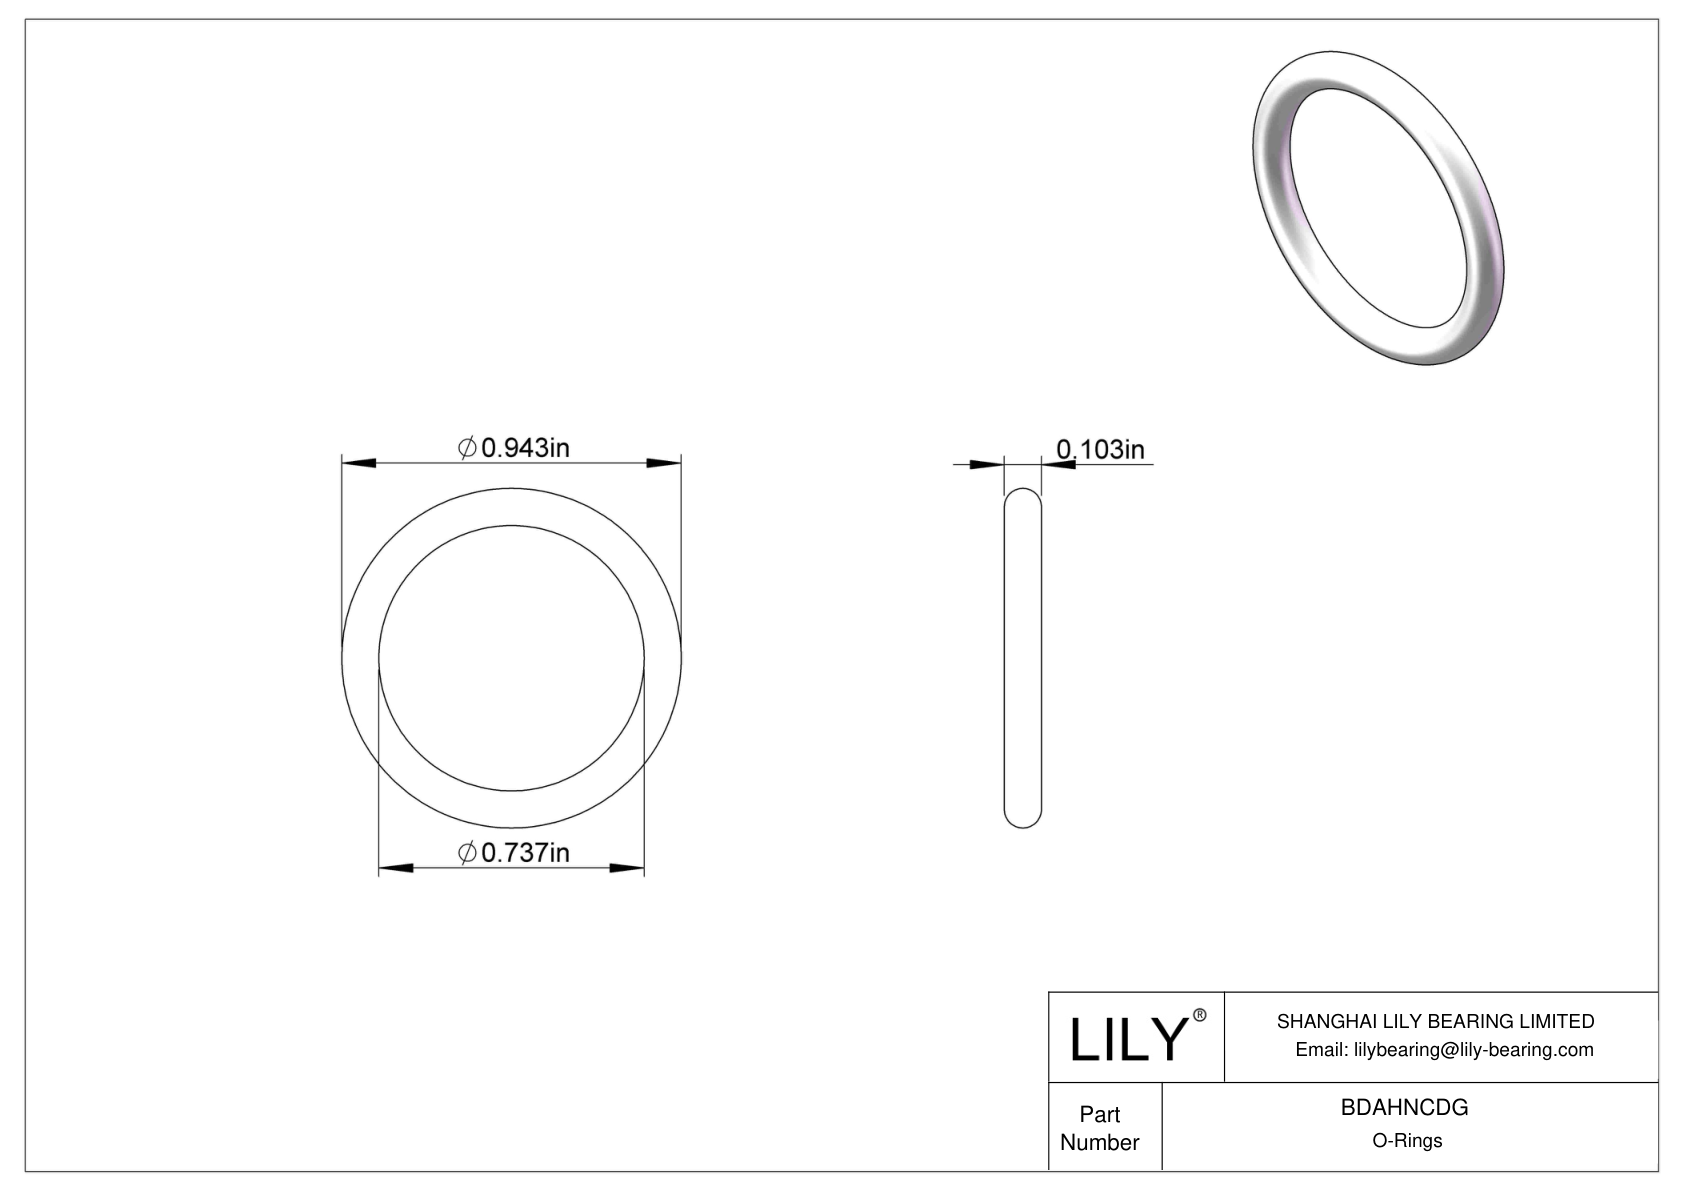 BDAHNCDG Oil Resistant O-Rings Round cad drawing